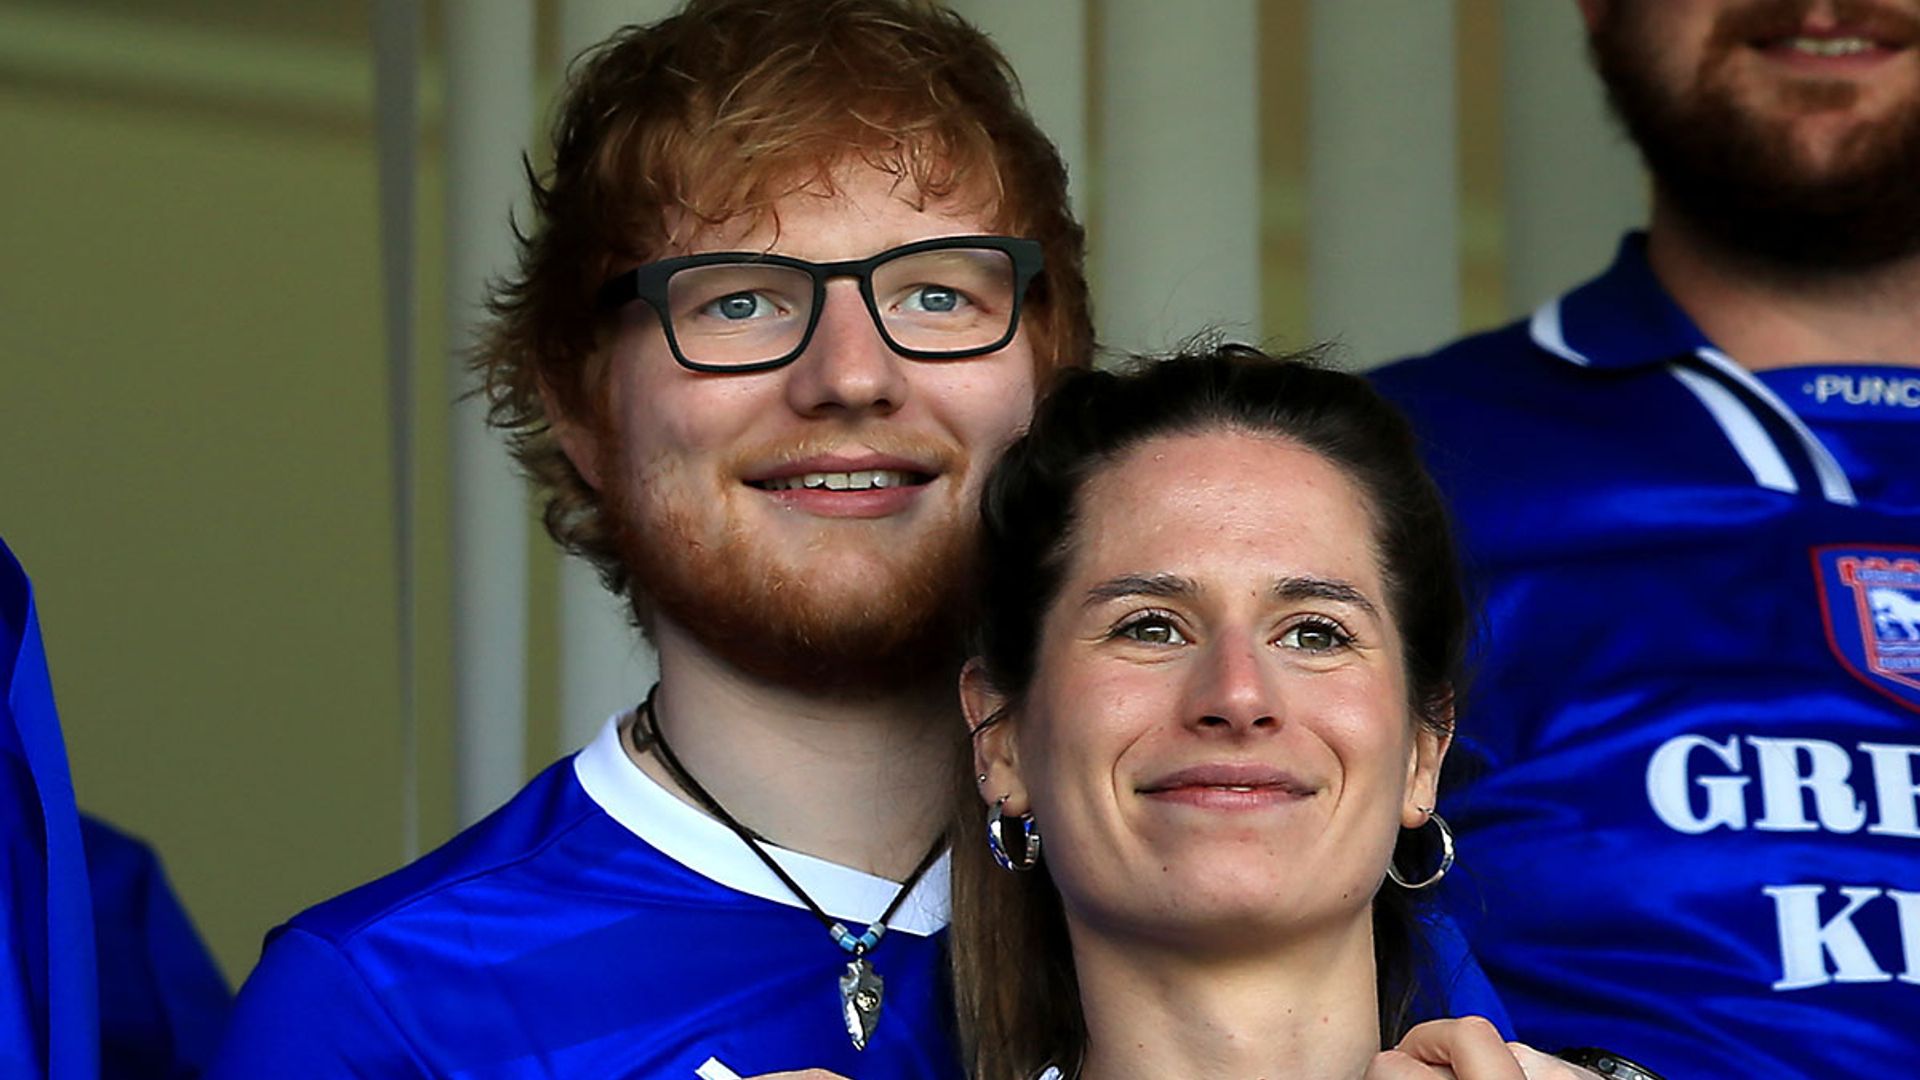 Ed Sheeran's romantic proposal to wife Cherry almost didn't happen – details